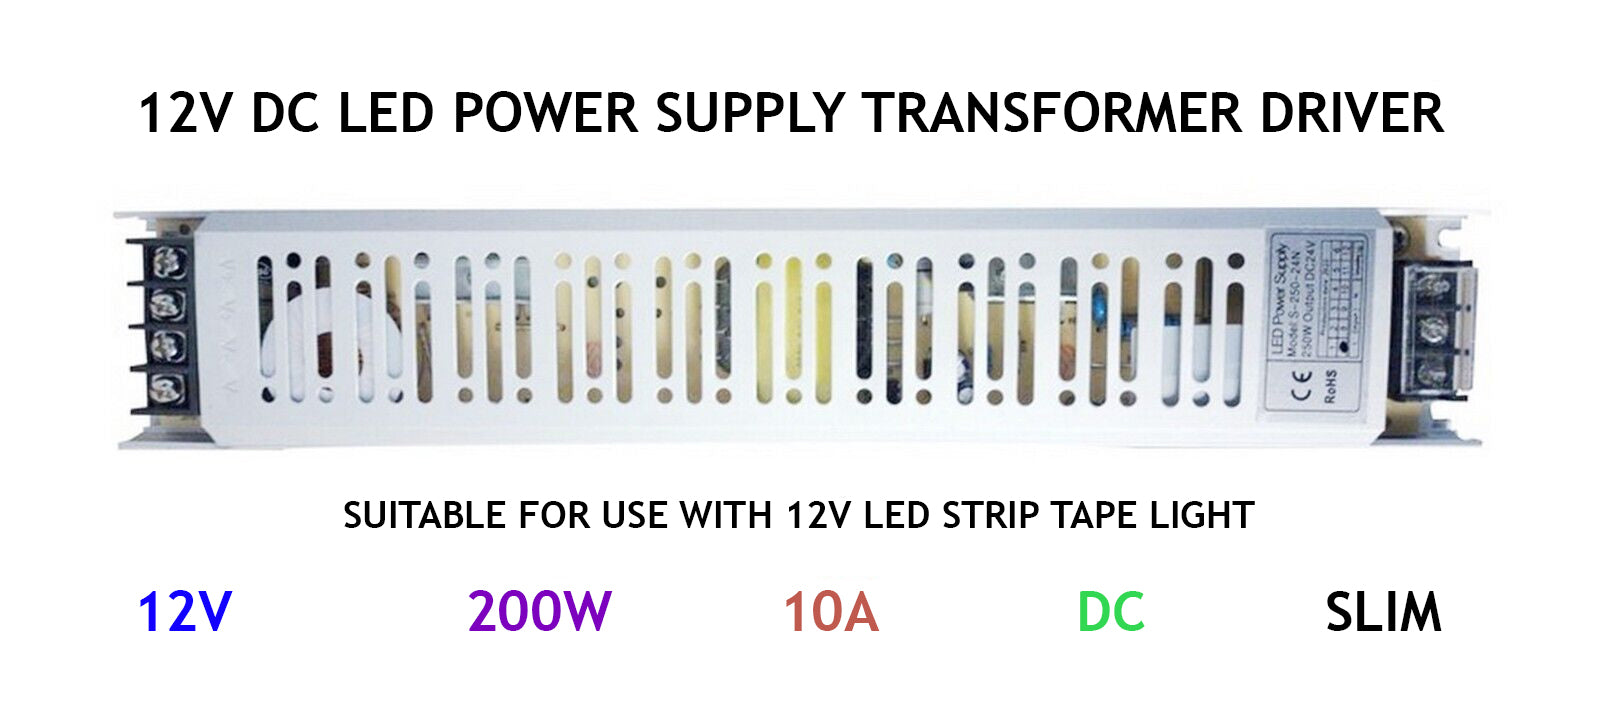 DC 12V LED Driver Power Supply 16A 200W Strip Tape Adapter Transformer Unit